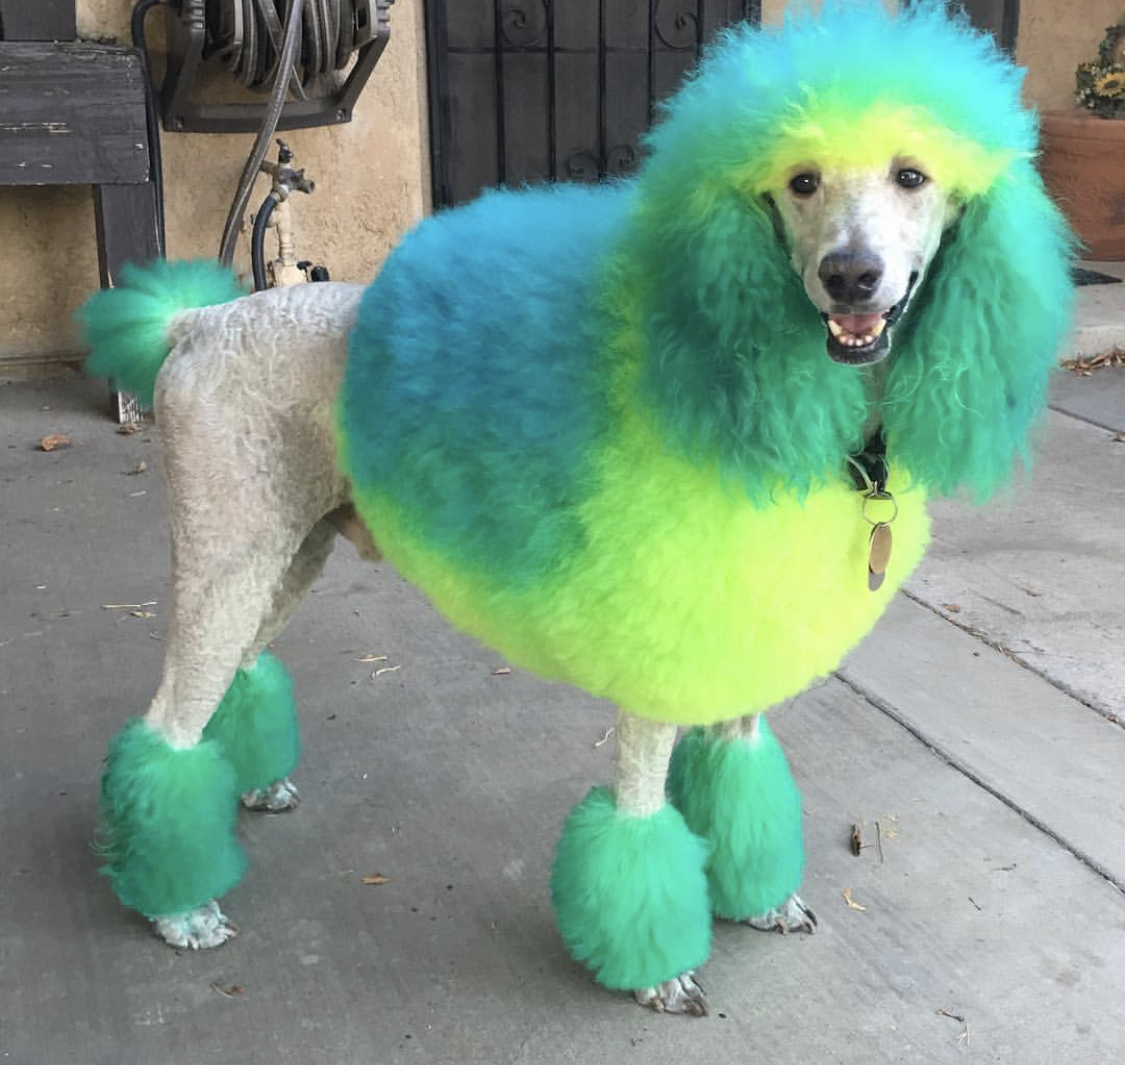 A Poodle wearing a blue, yellow green, and blue green fur color standing on the pavement while standing